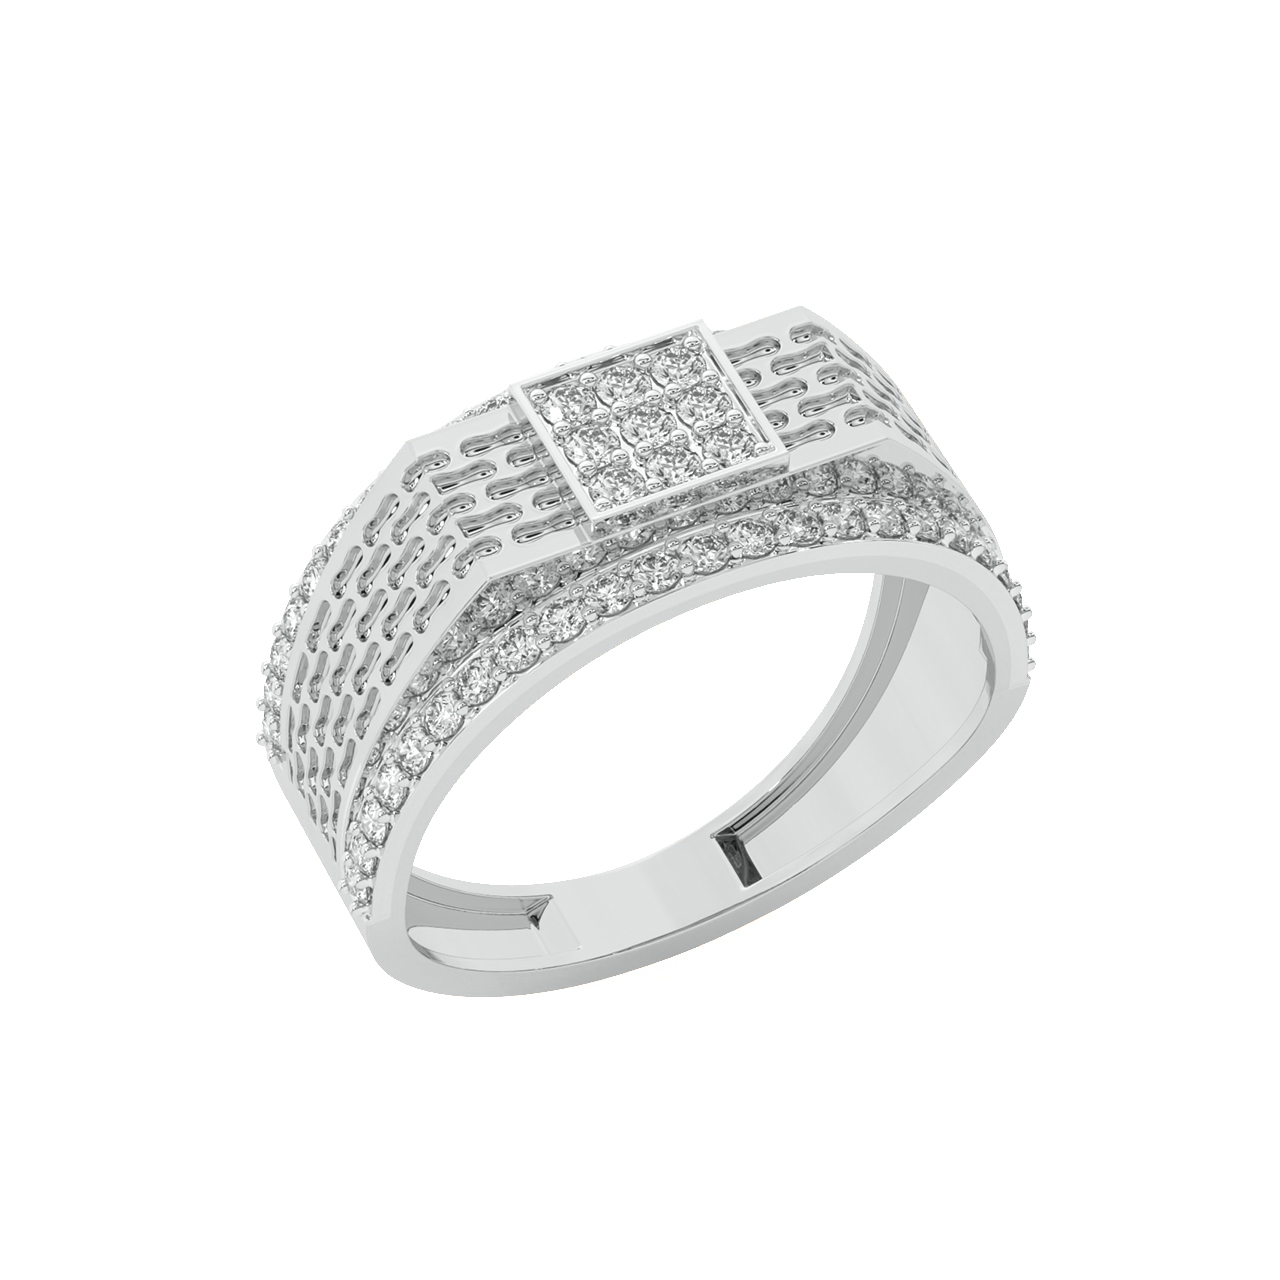 Buy quality 925 sterling silver turkish men's ring GRS0012 in Ahmedabad